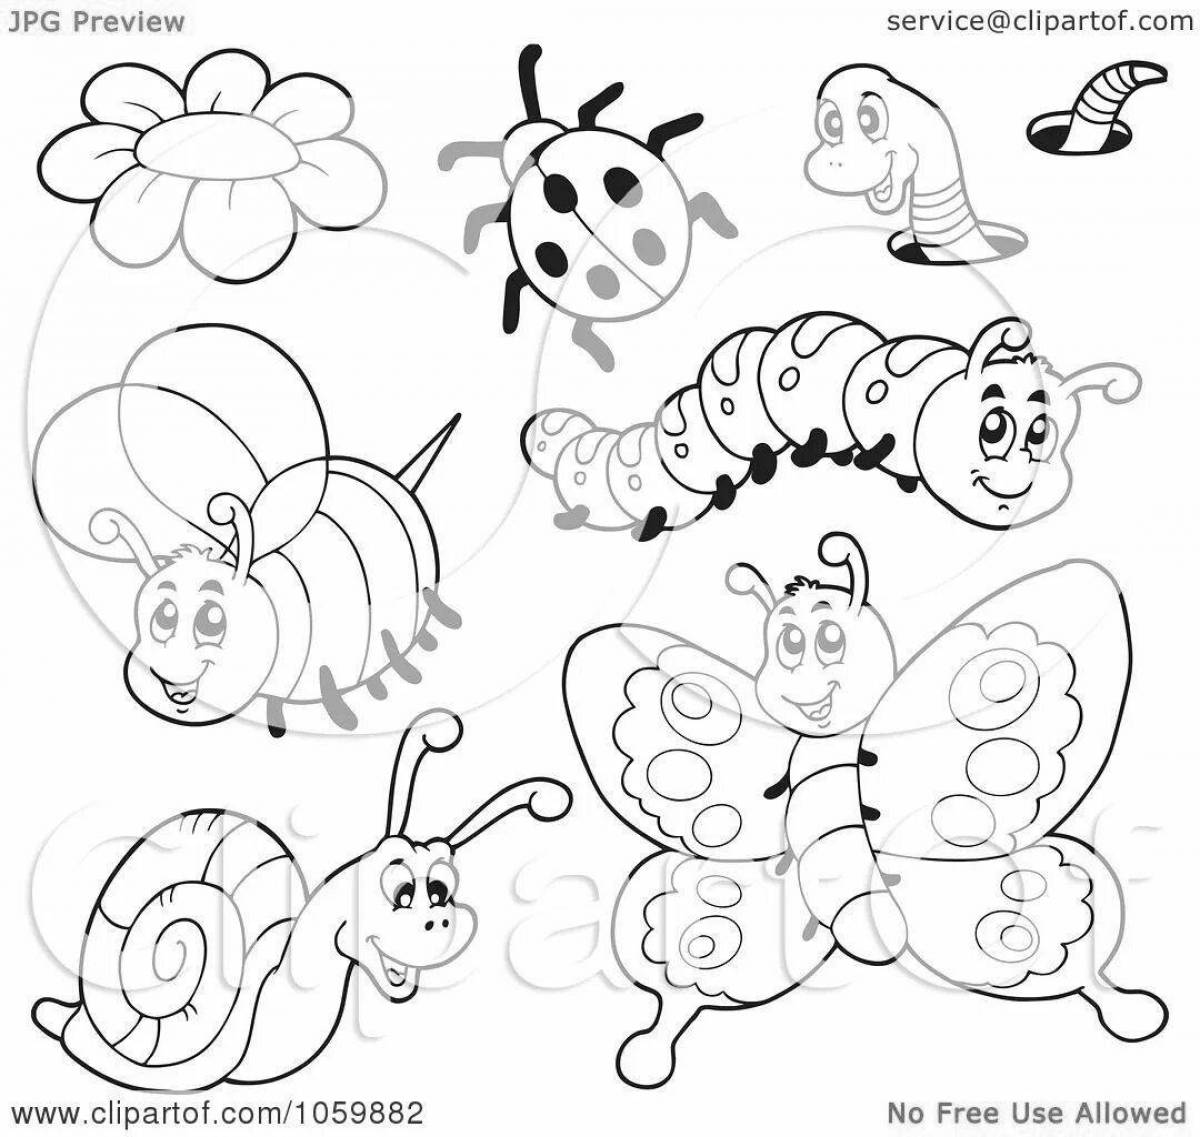 Great insect class coloring book